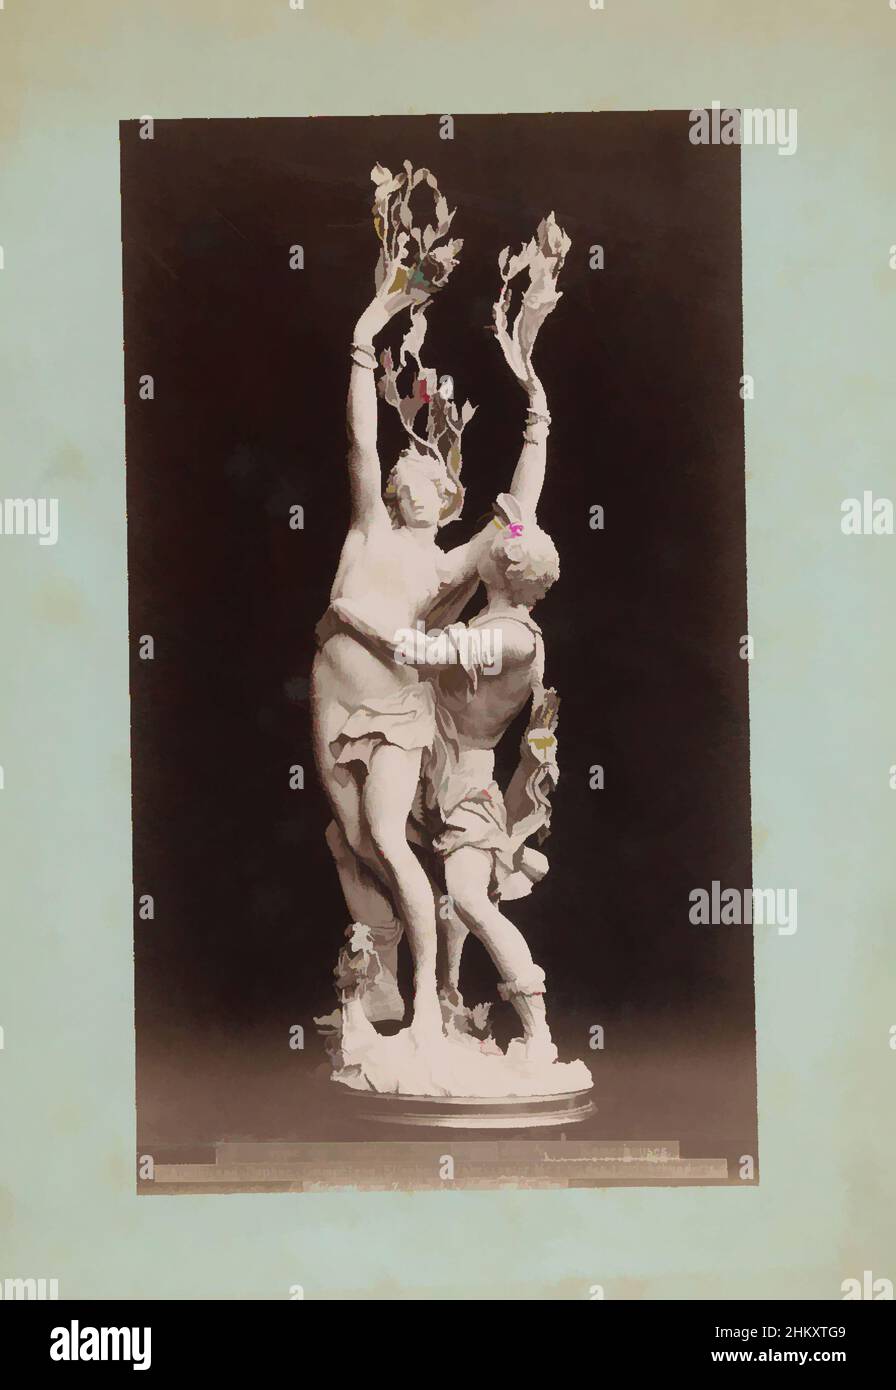 Art inspired by Sculpture of Apollo and Daphne by Jakob Auer, II. Gruppe der kunsthist. Sammlungen des A. H. Kaiserhauses. Apollo und Daphne. Gruppe von Elfenbein. Unbekannter Meister des 17. Jahrhunderts., Josef Löwy, Vienna, c. 1875 - c. 1900, cardboard, albumen print, height 292 mm, Classic works modernized by Artotop with a splash of modernity. Shapes, color and value, eye-catching visual impact on art. Emotions through freedom of artworks in a contemporary way. A timeless message pursuing a wildly creative new direction. Artists turning to the digital medium and creating the Artotop NFT Stock Photo